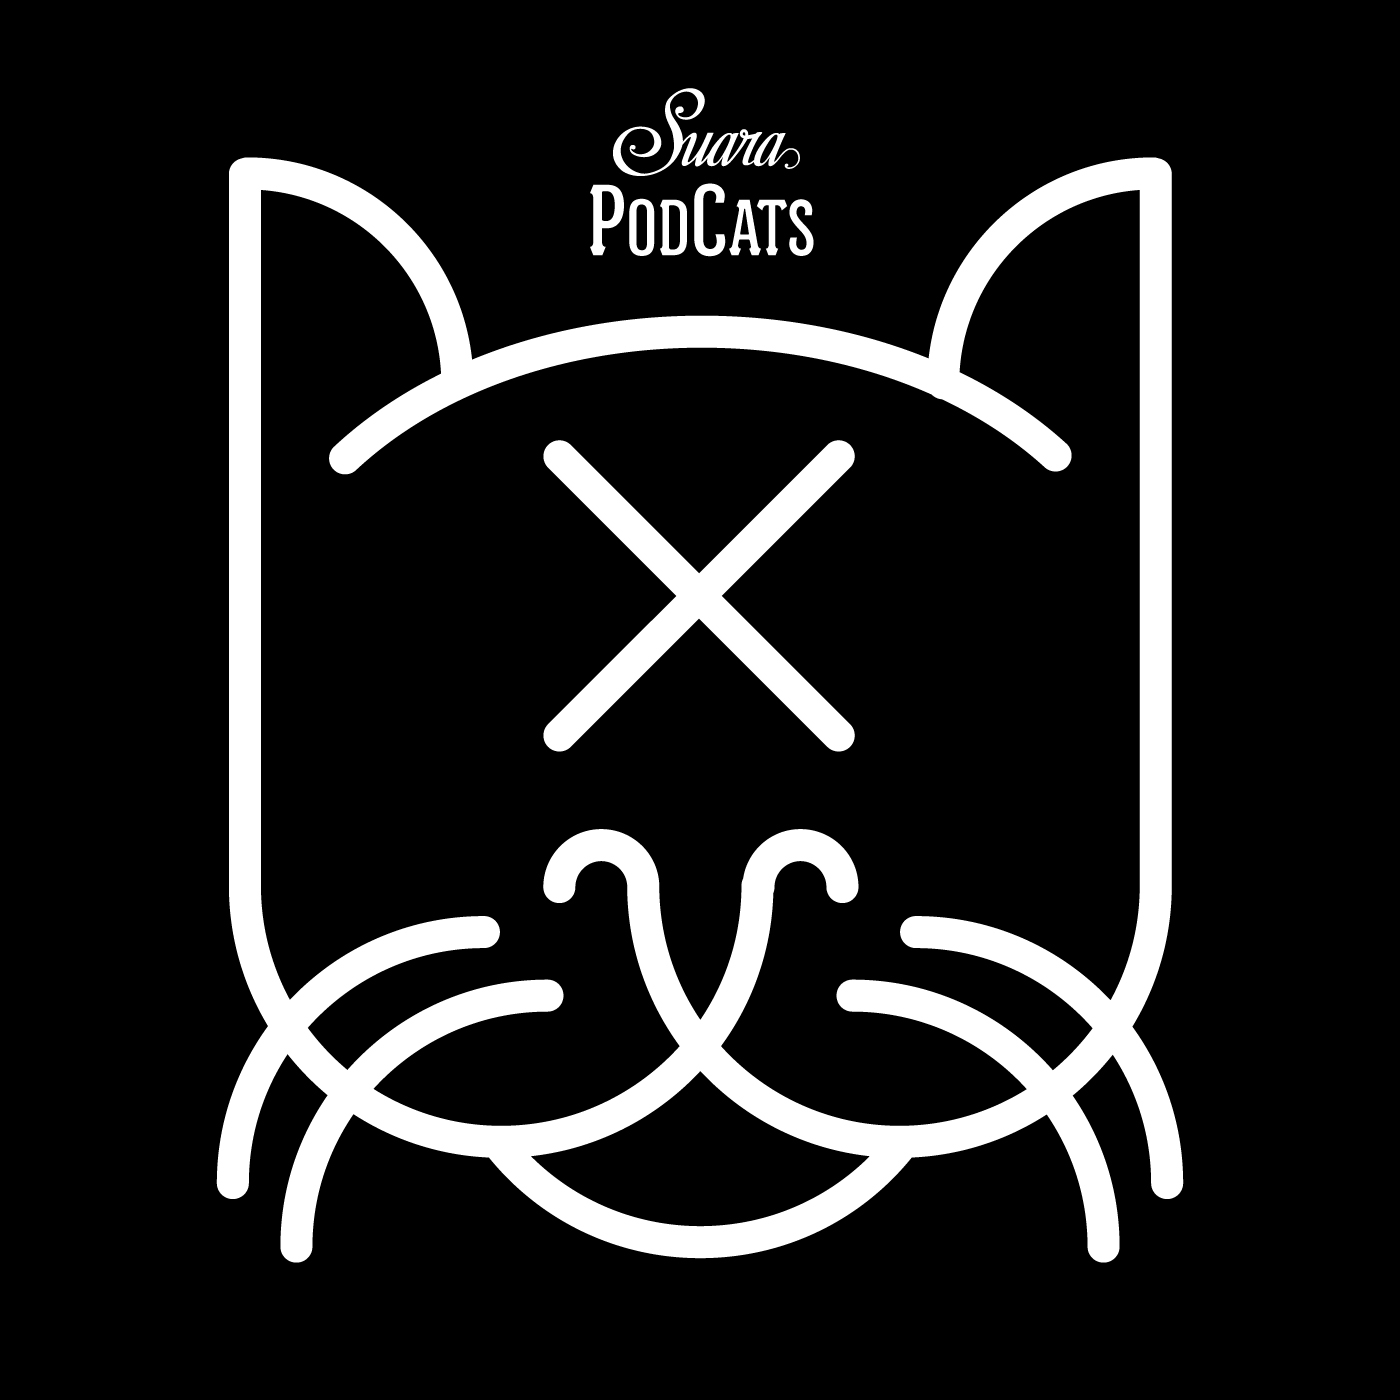 Delta Podcasts - Suara PodCats by Coyu (02.04.2018)